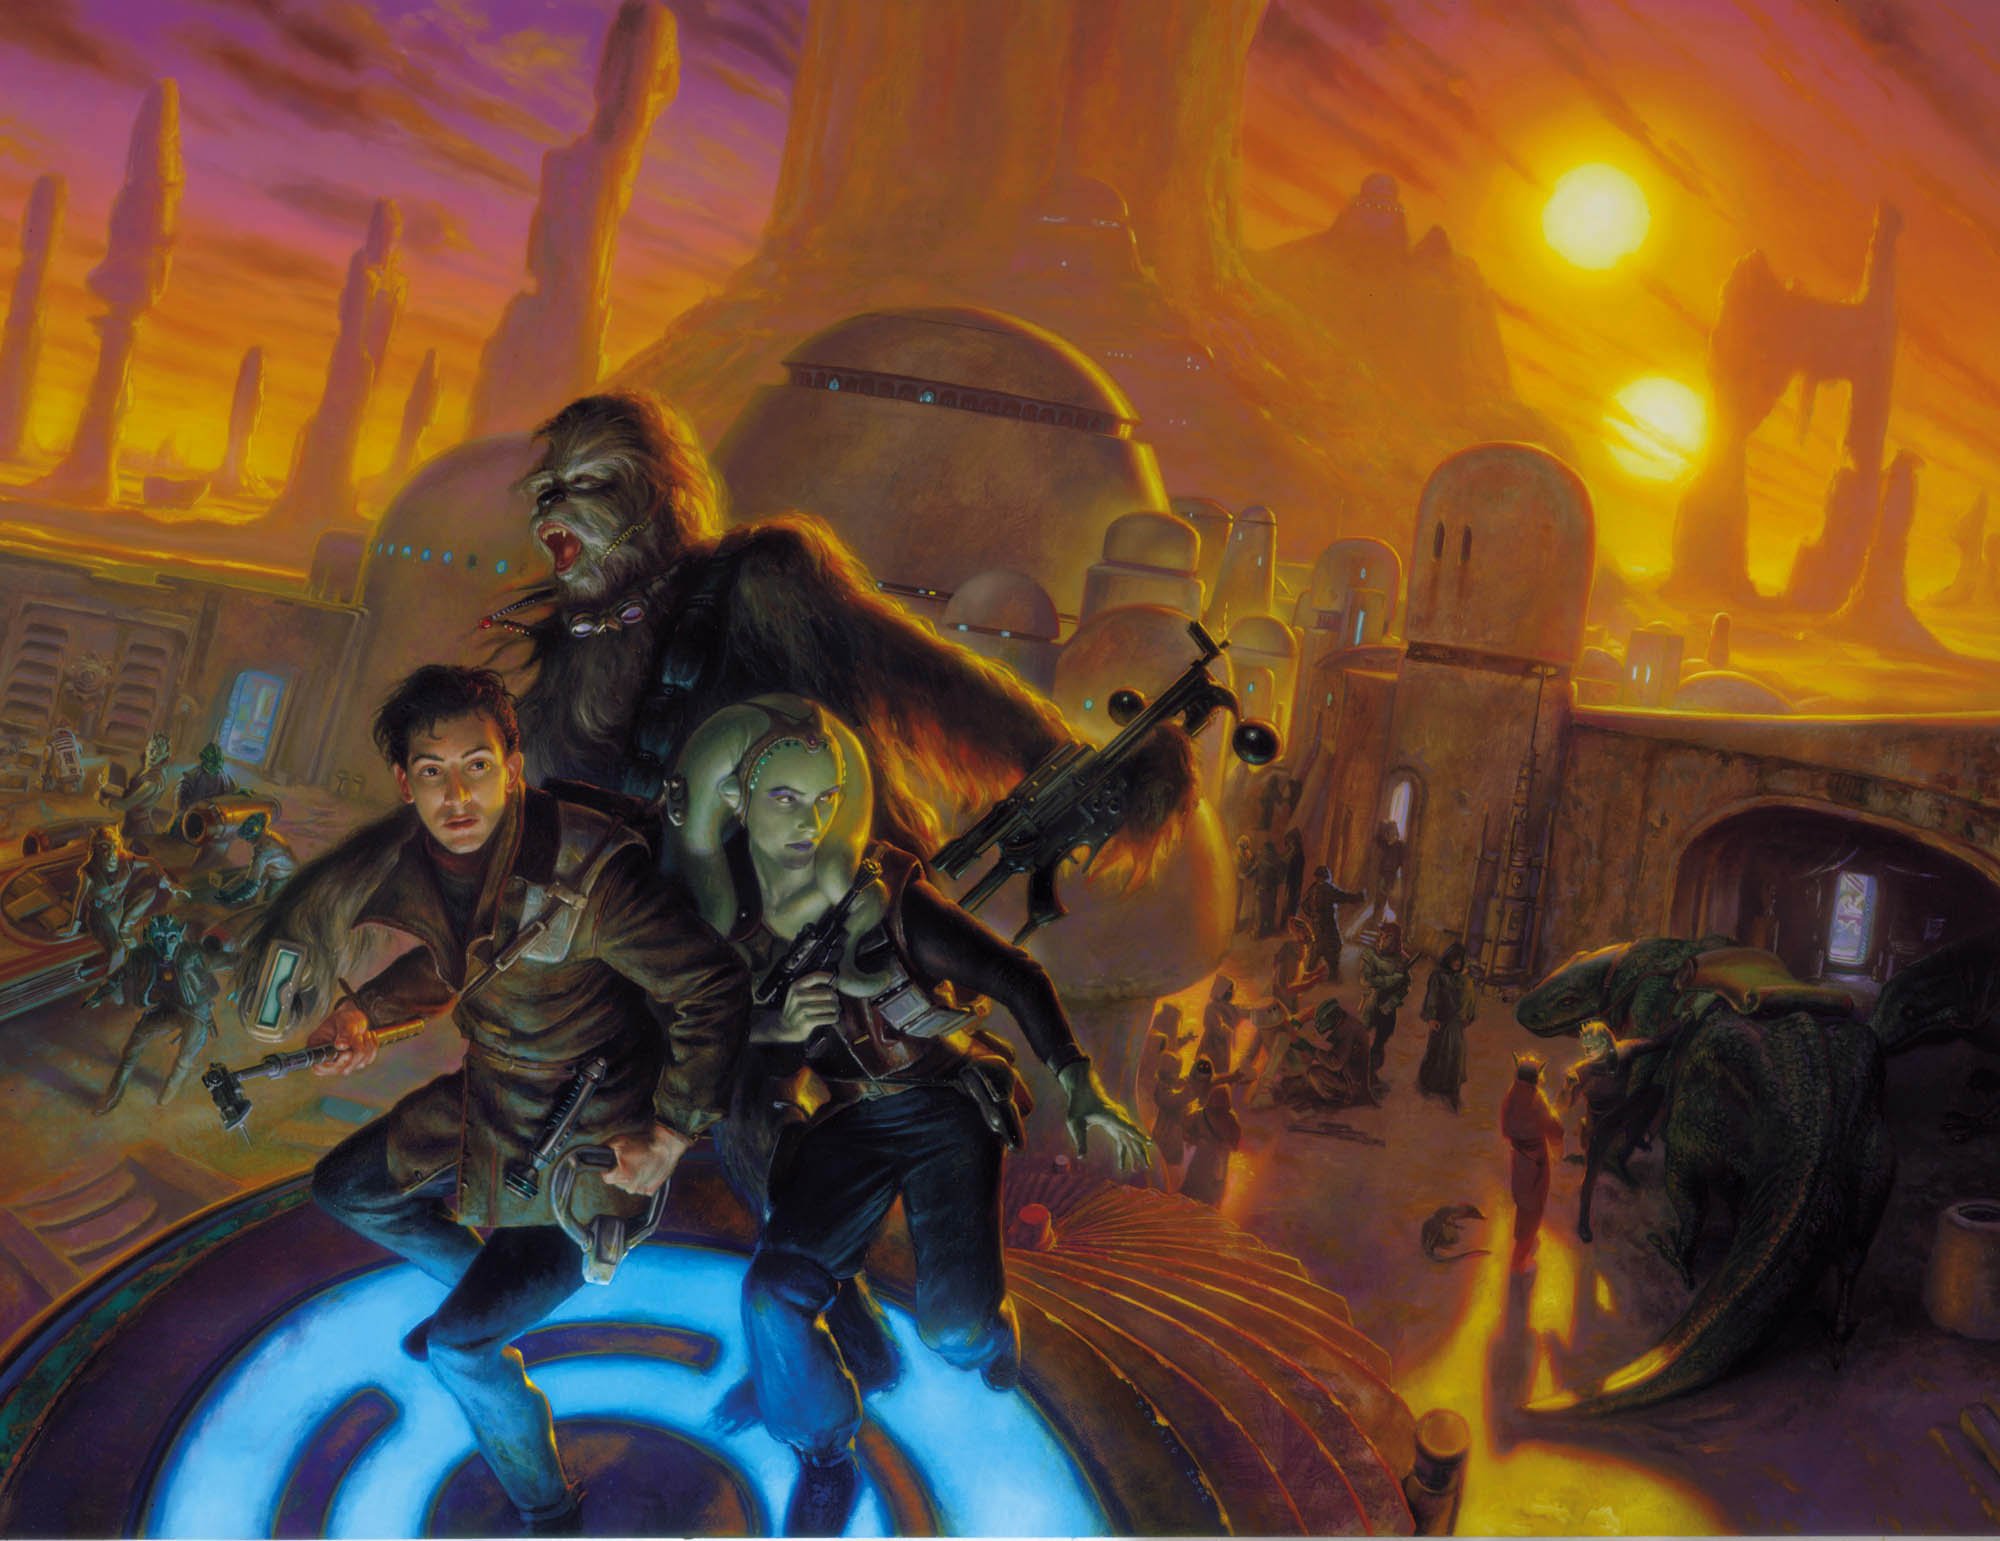 Star Wars Galaxies
33" x 45"  Oil on Panel 2003
advertising commission for the game from LucasArts
original art available for purchase